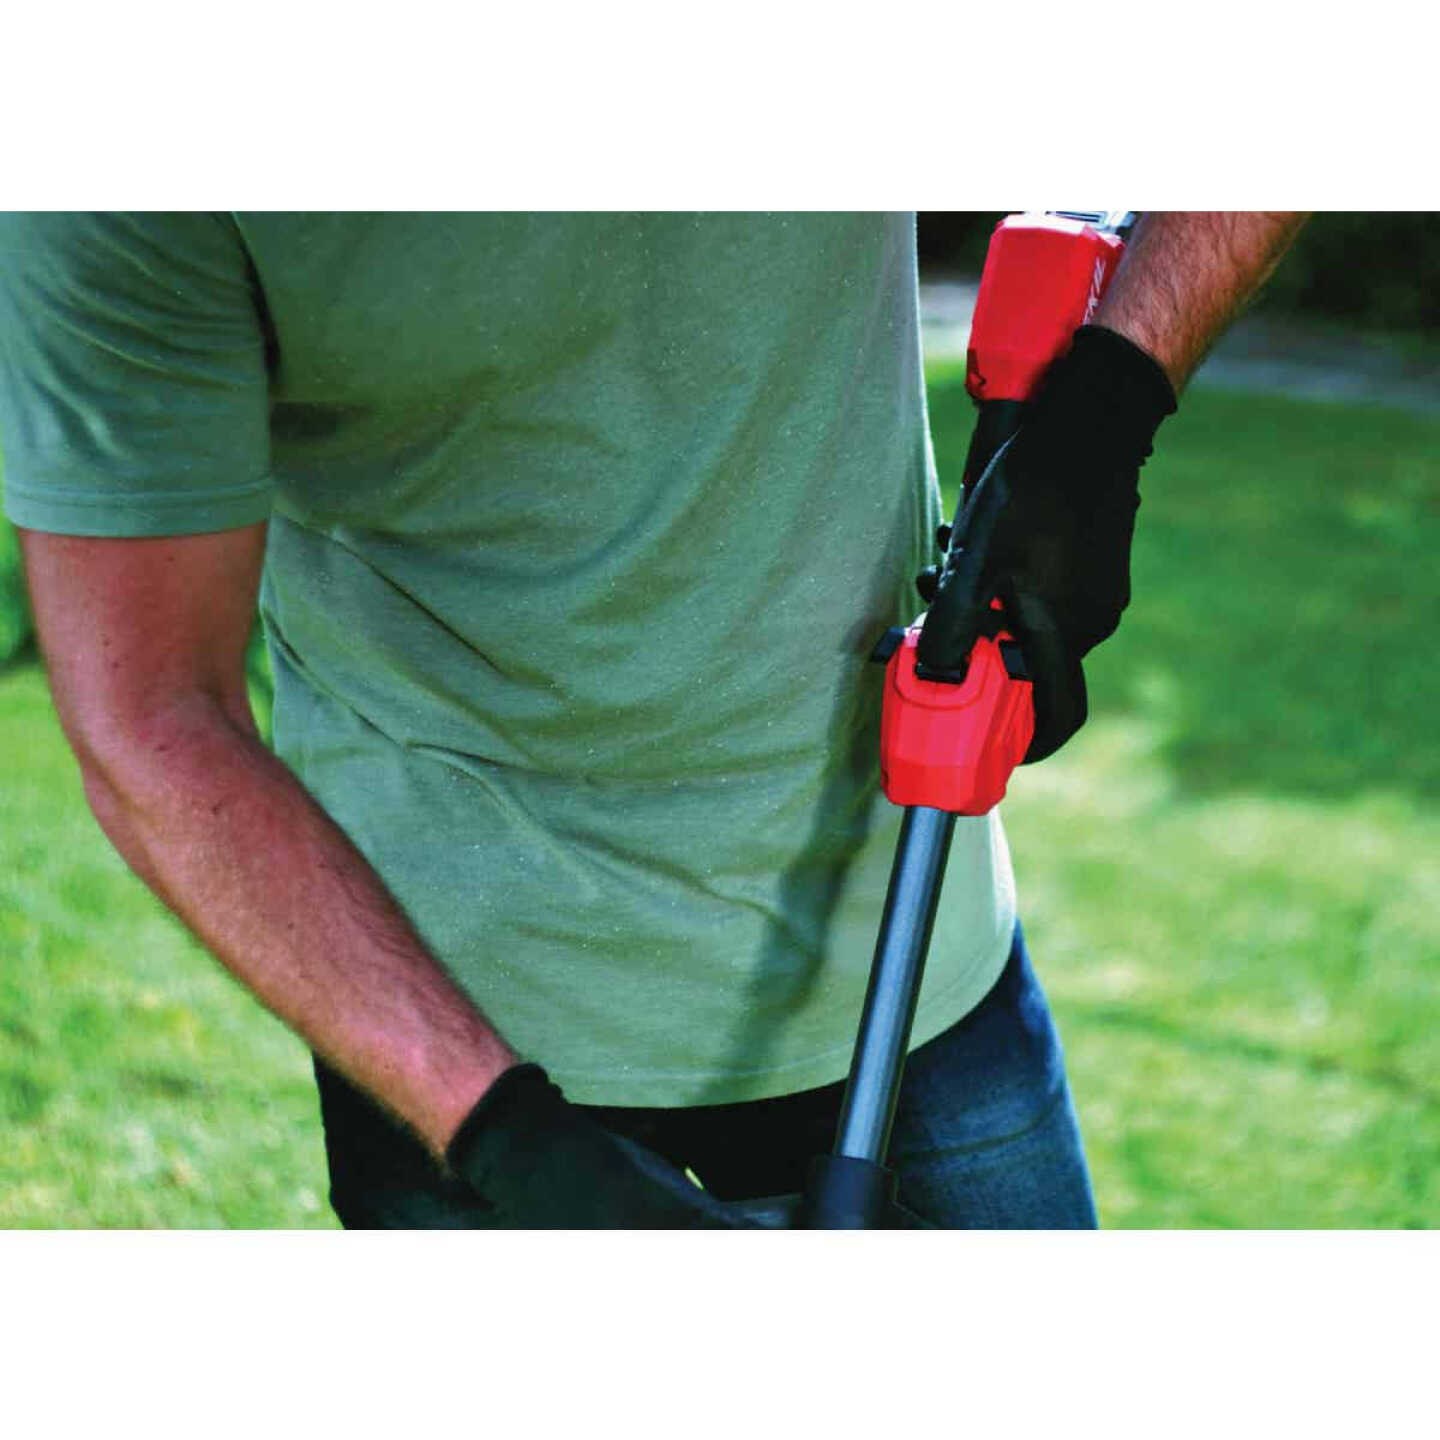 Skil LT4823B-10 PWRCore 20 Brushless 20V 13 String Trimmer with 4.0Ah Battery & Charger